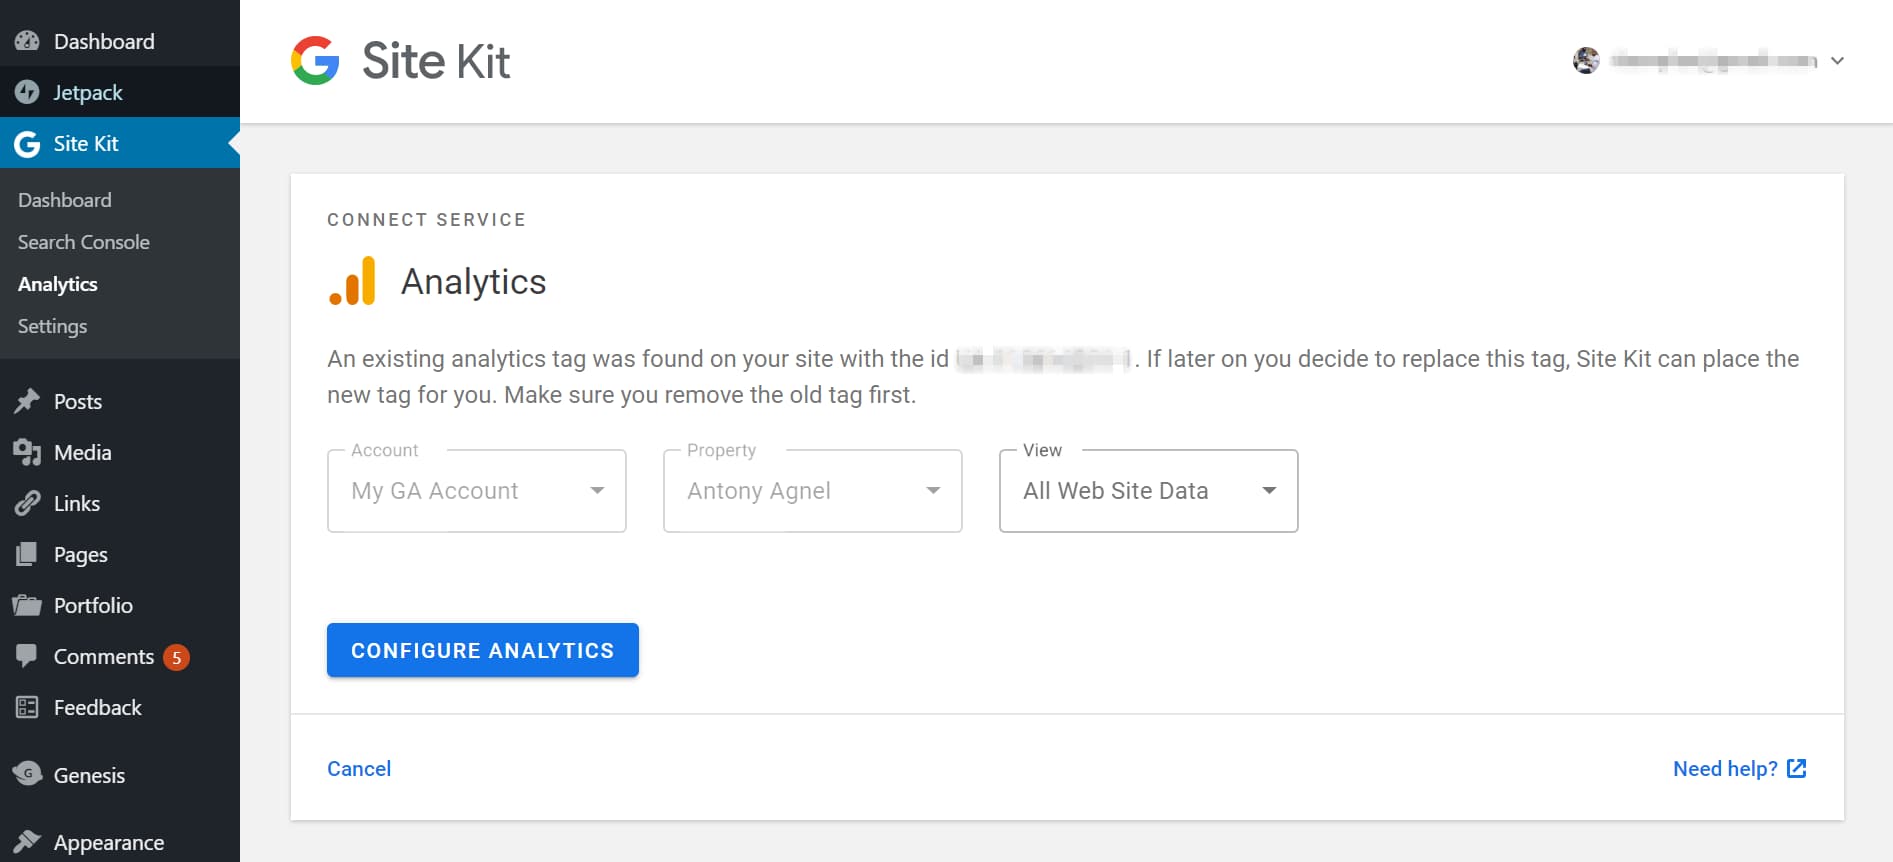 choose google analytics account and property to connect with site kit